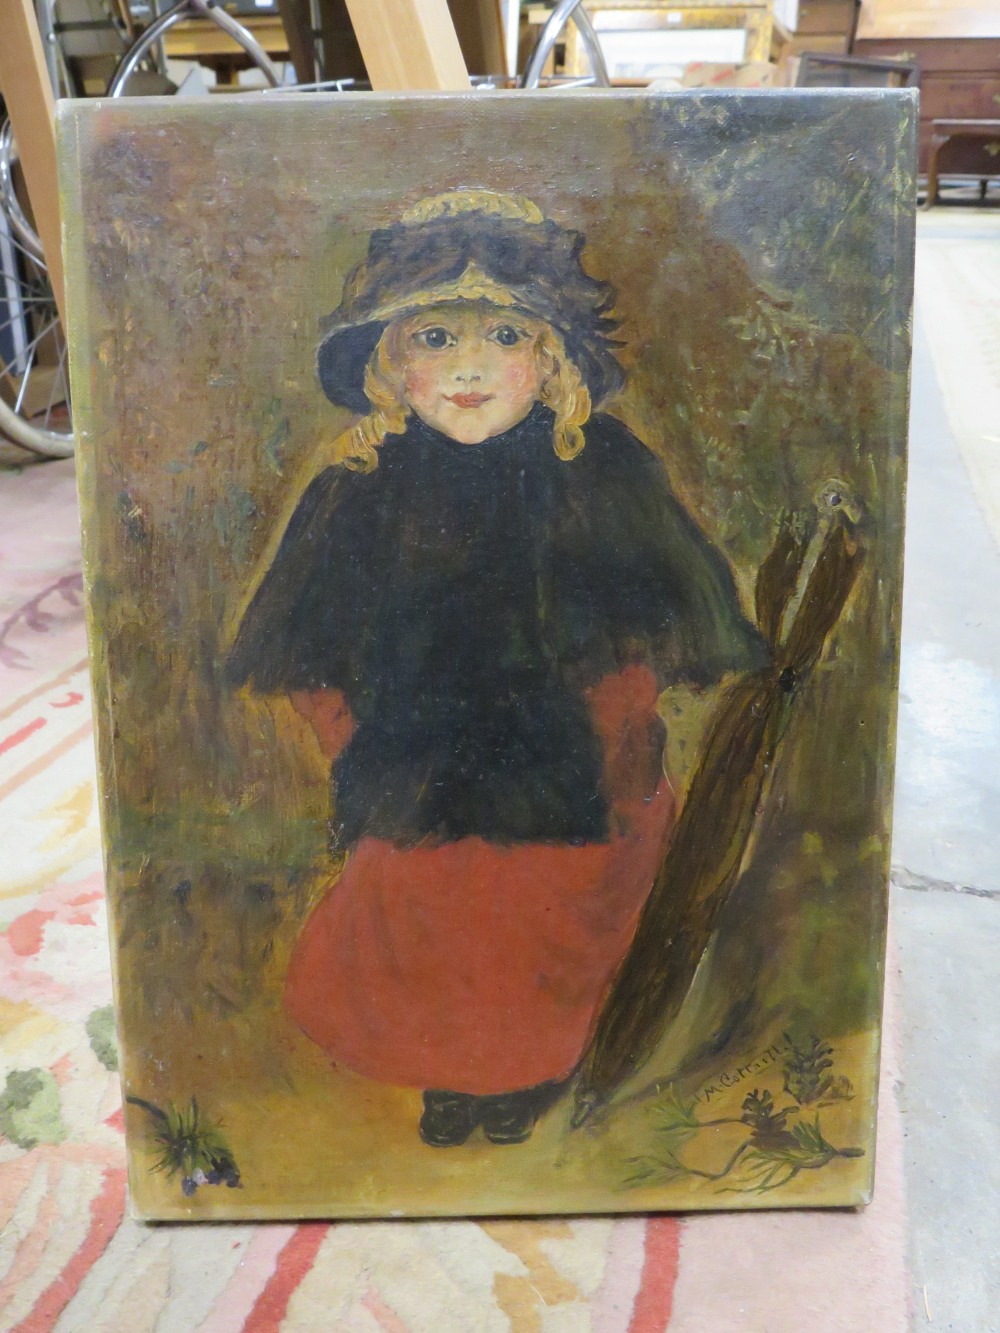 A.M.COTTERILL OIL ON CANVAS STUDY OF A YOUNG GIRL HOLDING AN UMBRELLA - Image 3 of 3